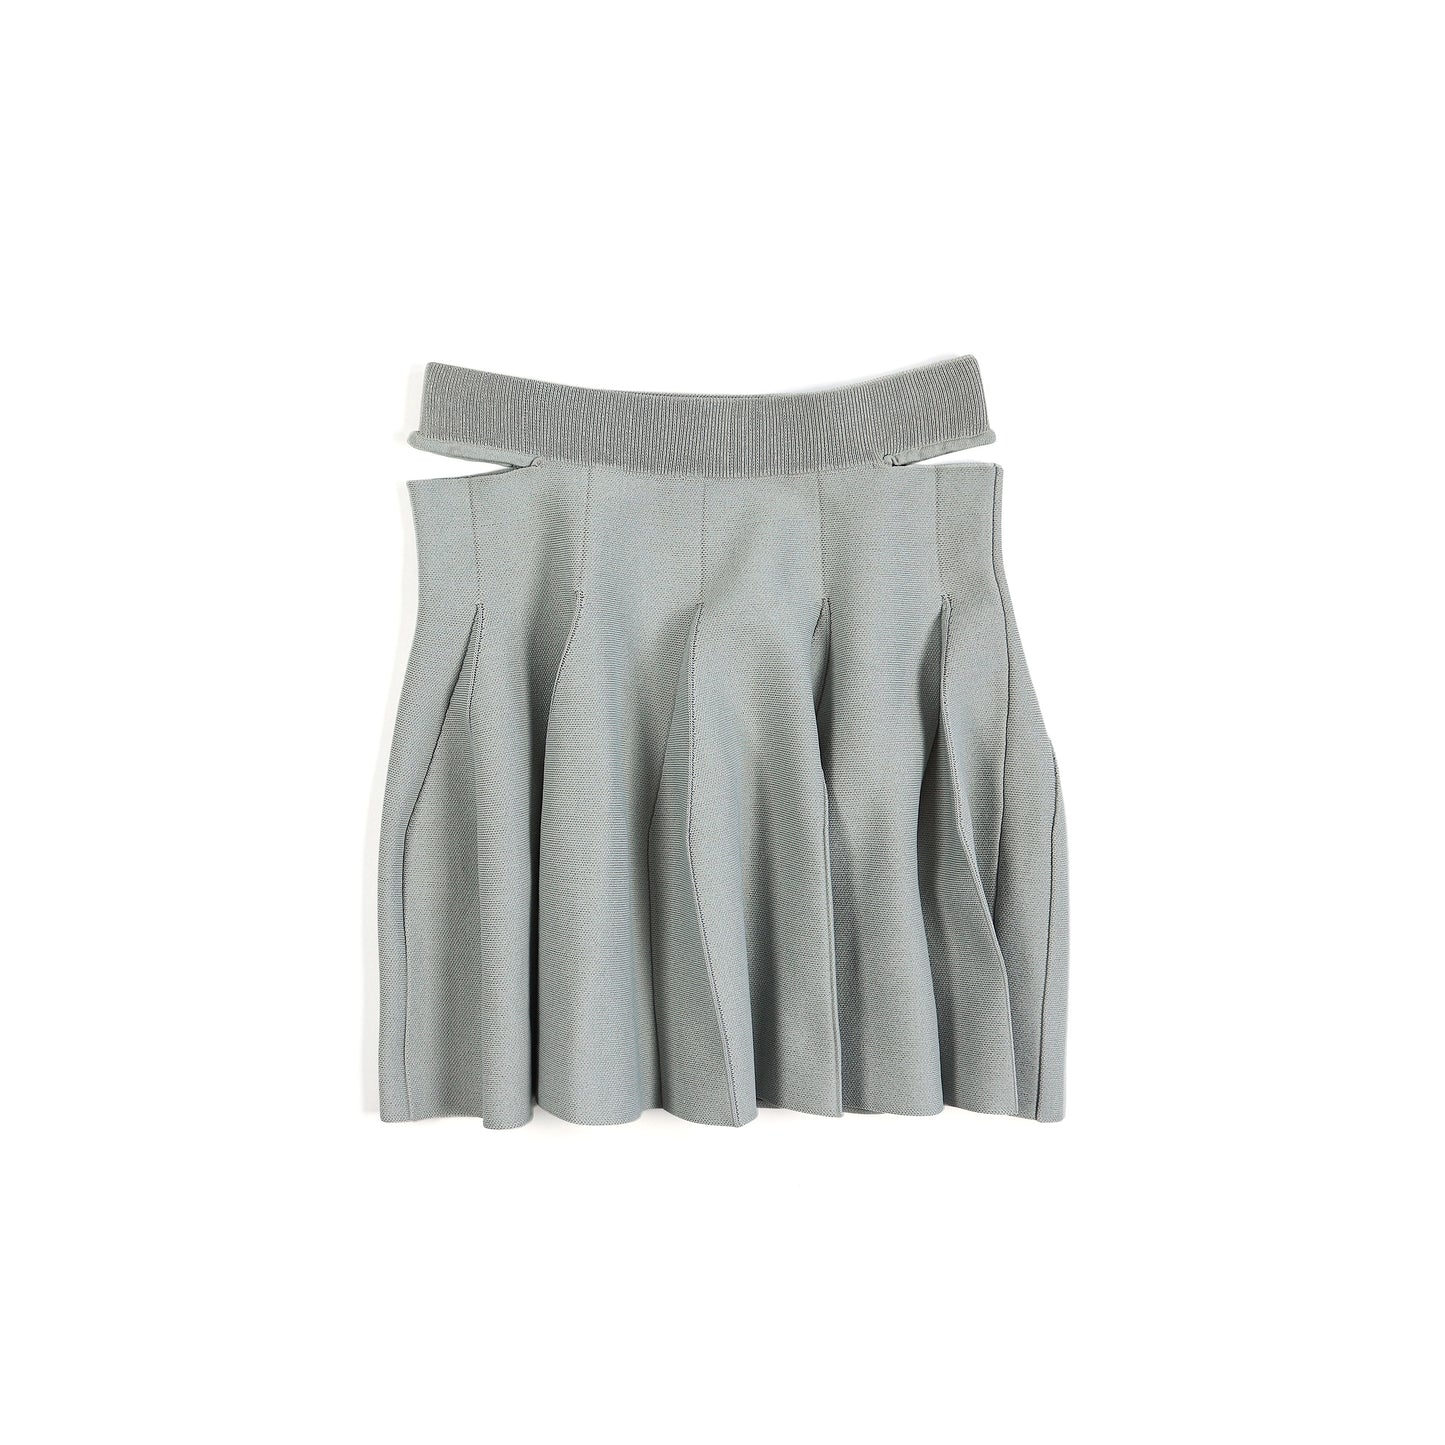 FANG: Knitted Skirt with Slits